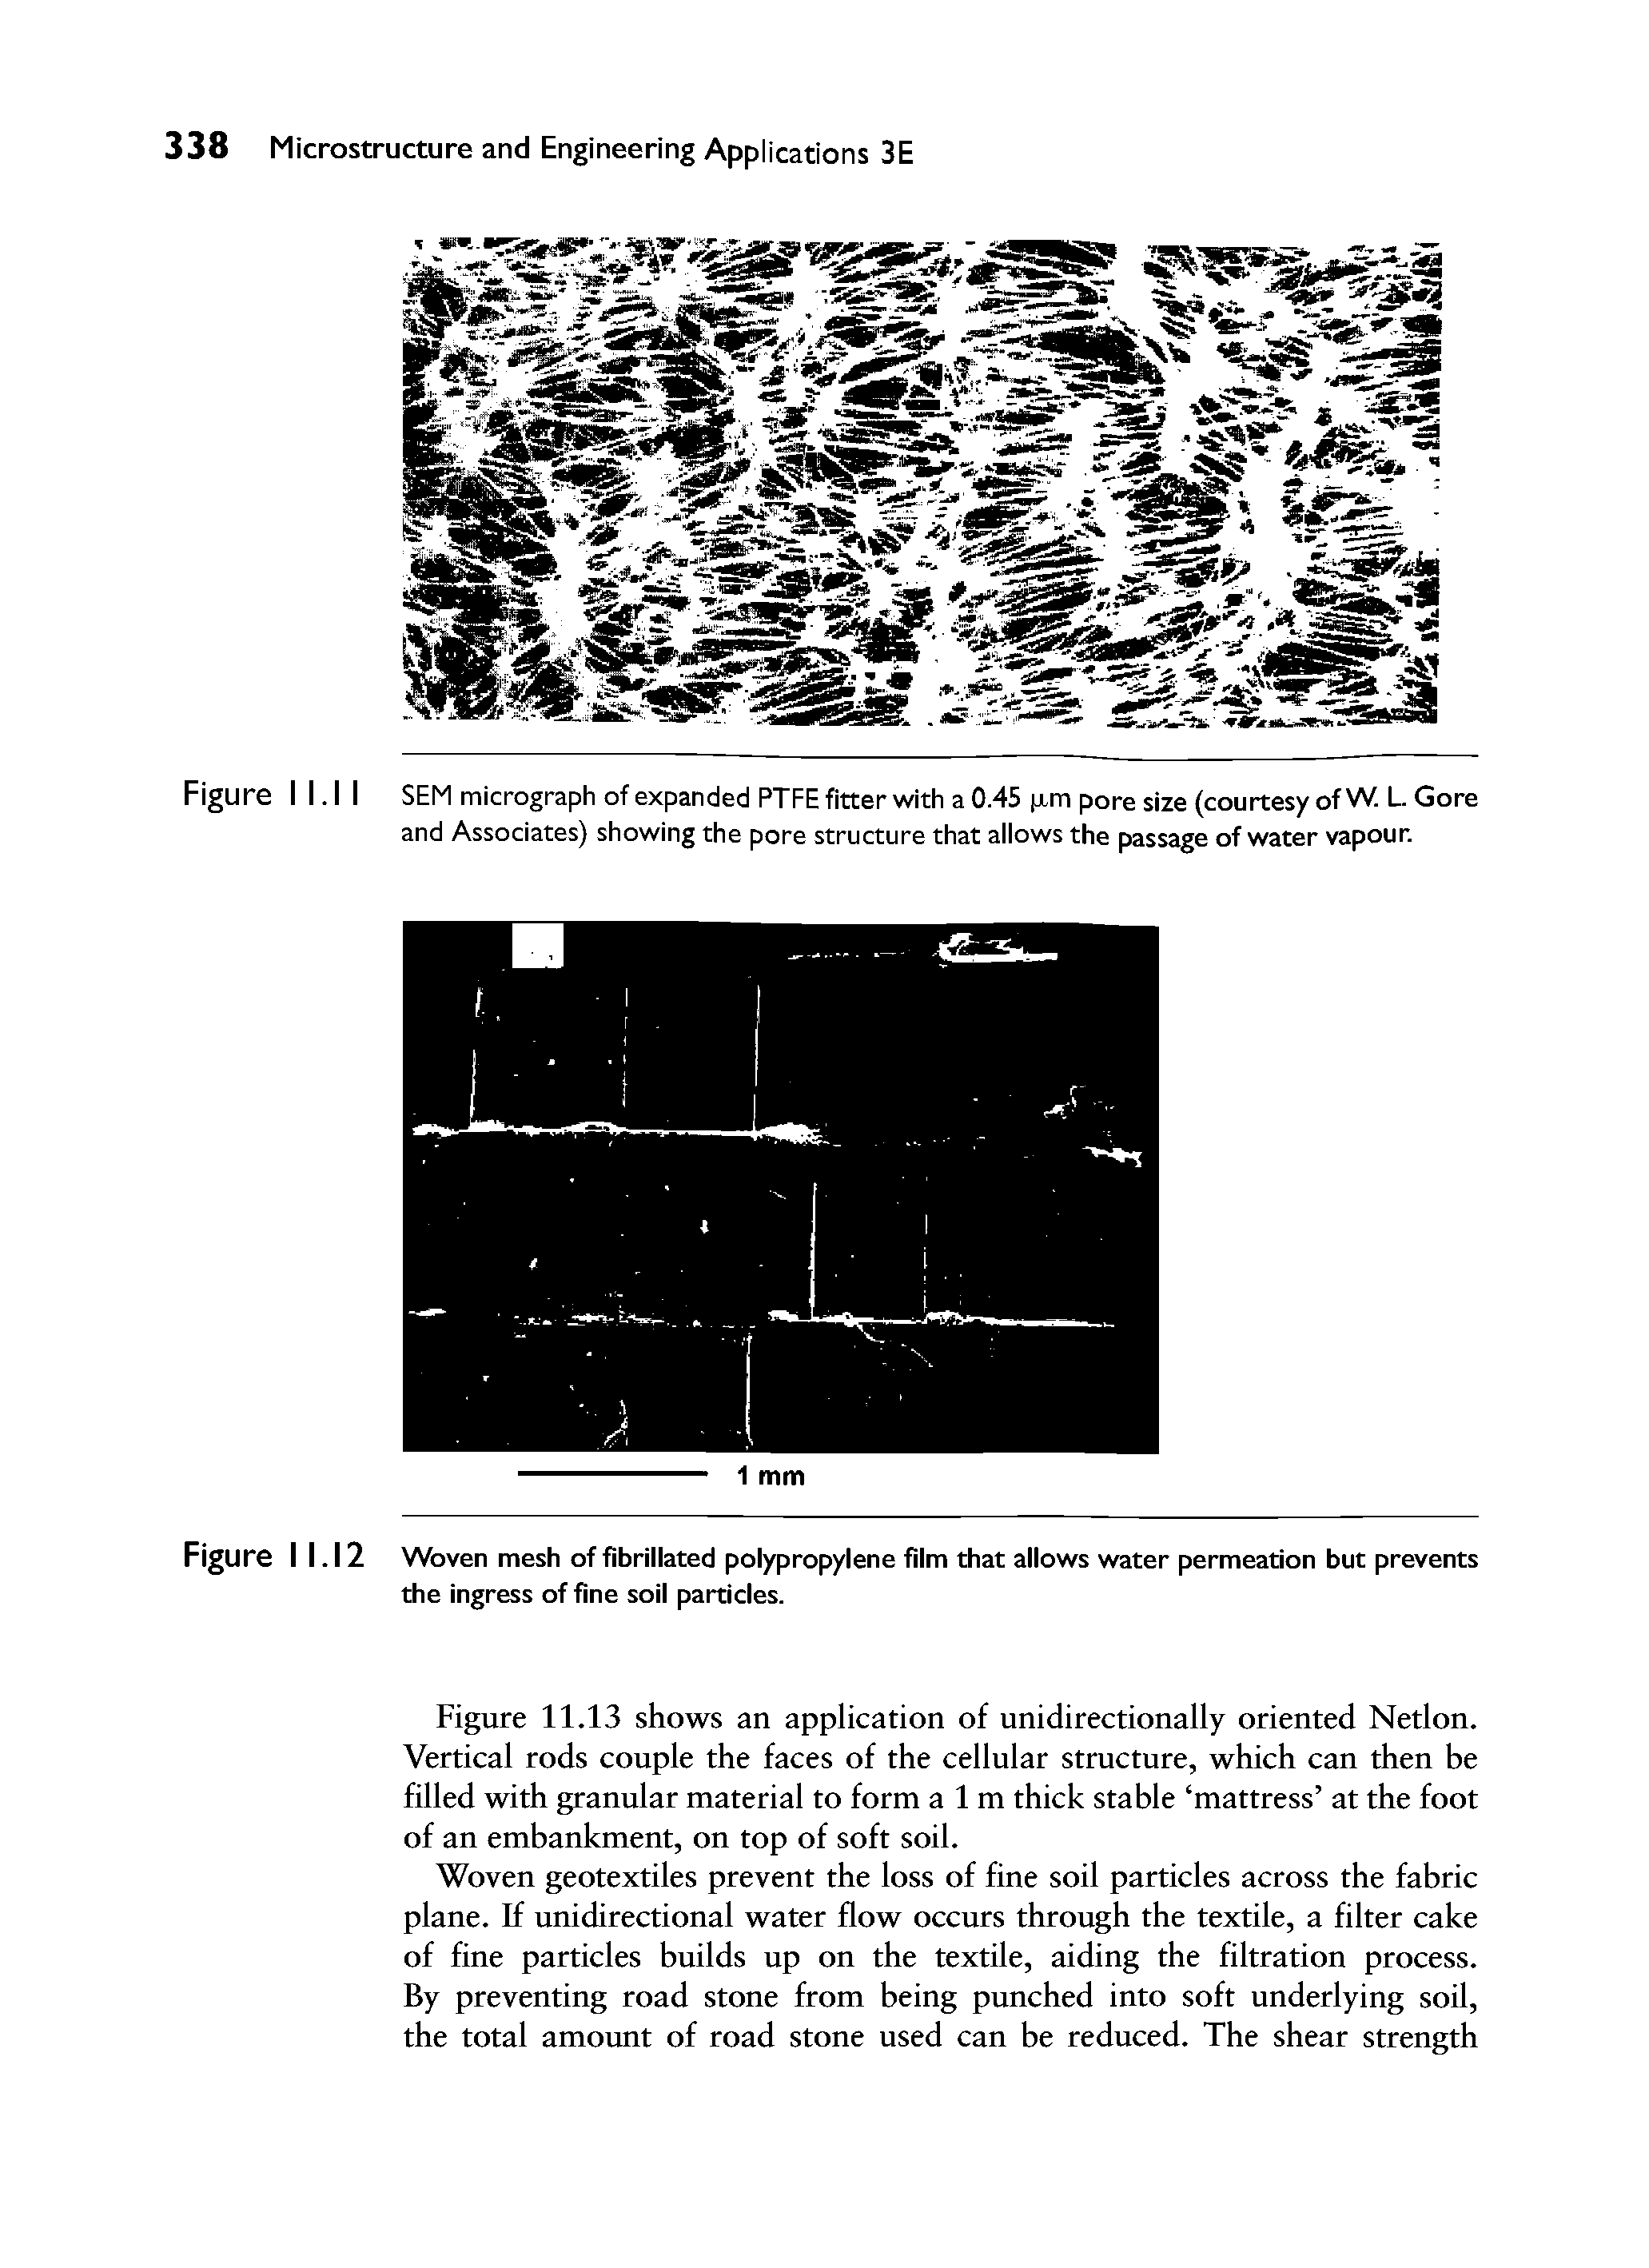 Figure I l.l I SEM micrograph of expanded PTFE fitter with a 0.45 Jjim pore size (courtesy of W. L Gore and Associates) showing the pore structure that allows the passage of water vapour.